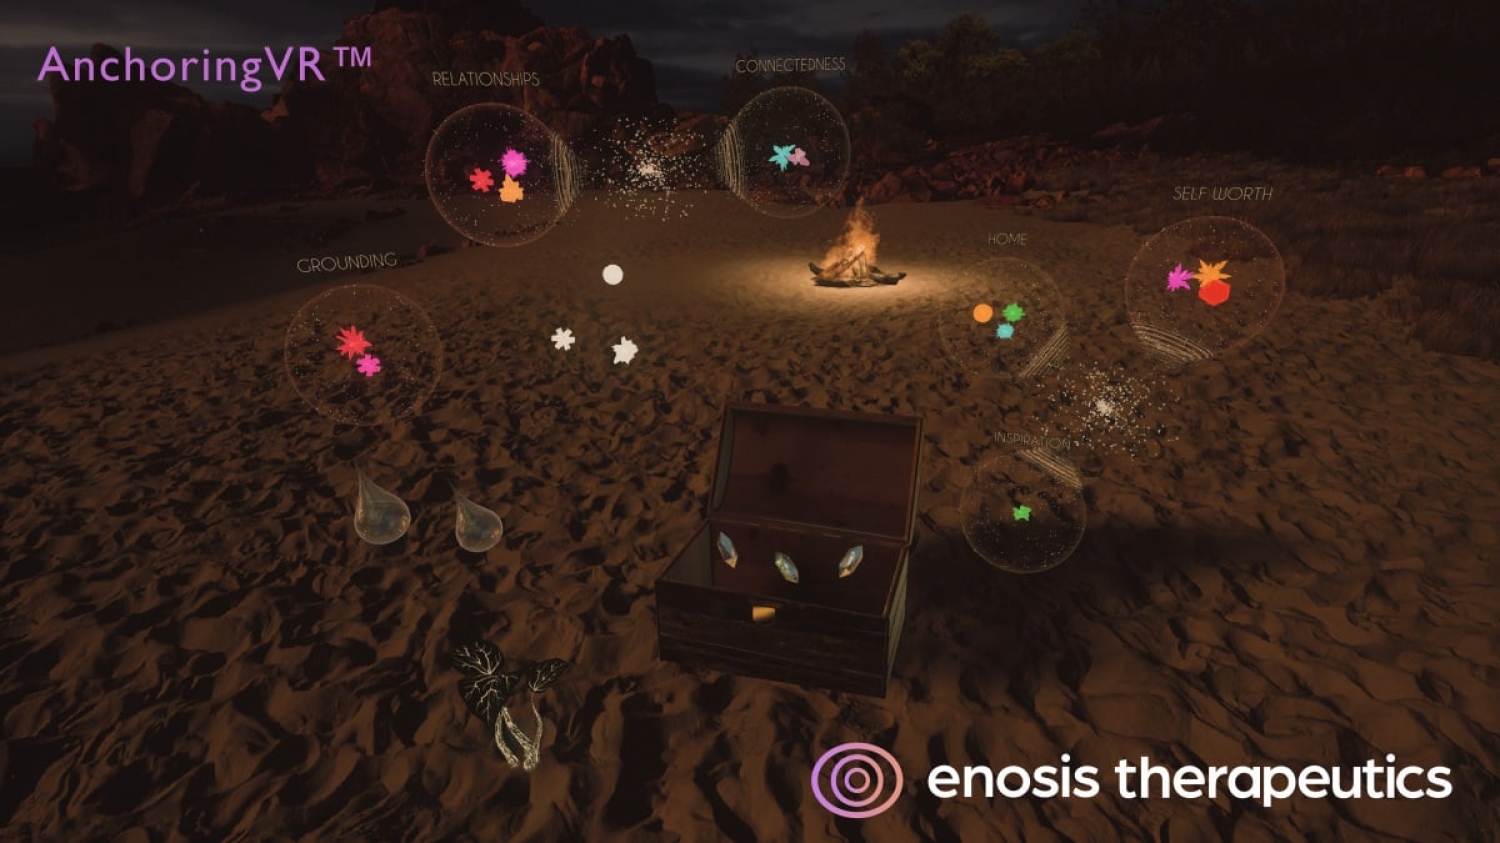 When virtual reality meets psychedelic therapy